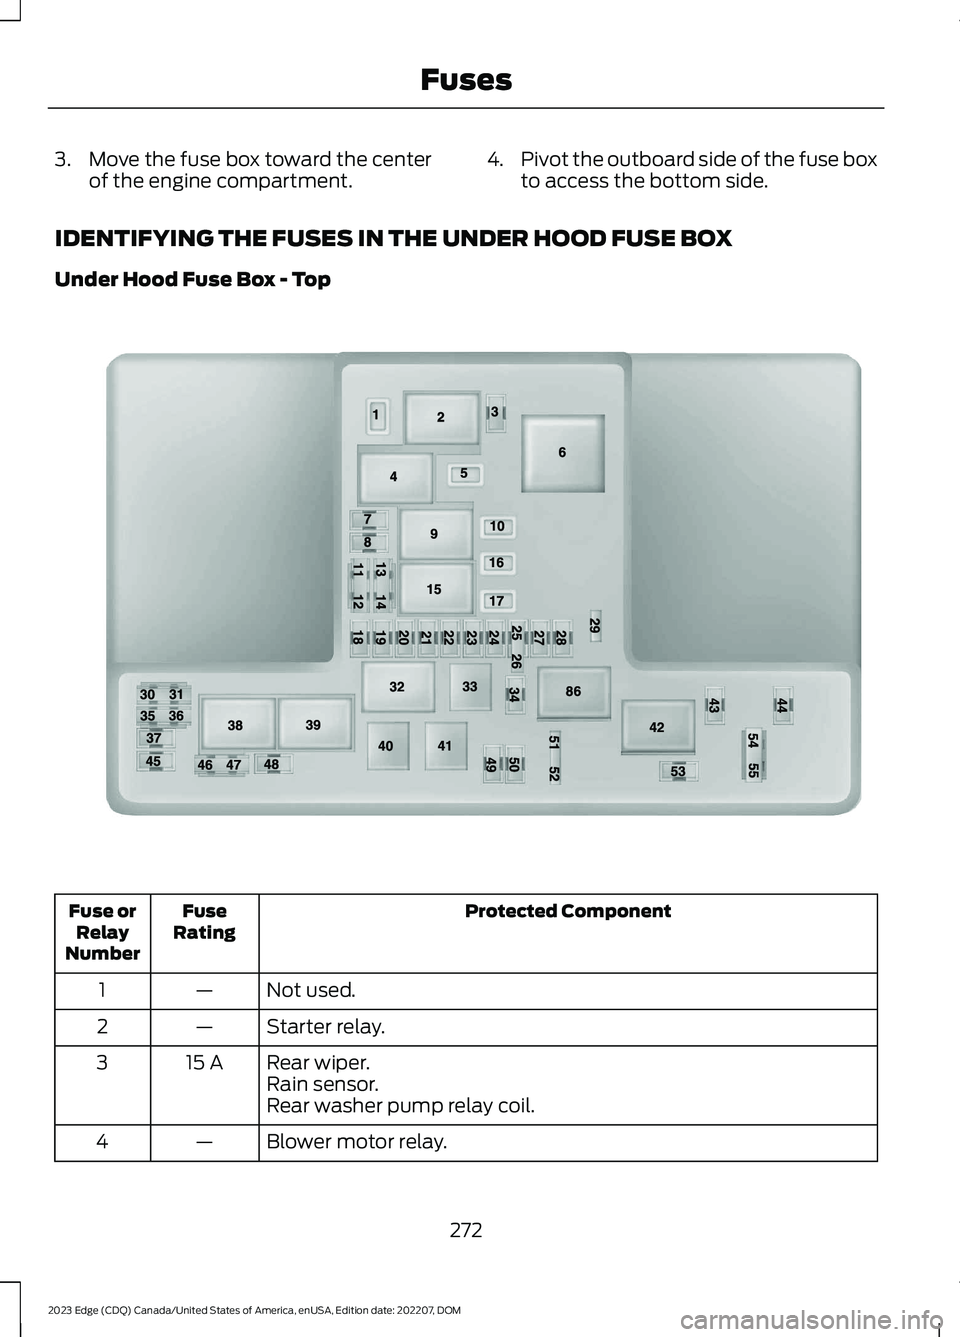 FORD EDGE 2023  Owners Manual 3.Move the fuse box toward the centerof the engine compartment.4.Pivot the outboard side of the fuse boxto access the bottom side.
IDENTIFYING THE FUSES IN THE UNDER HOOD FUSE BOX
Under Hood Fuse Box 